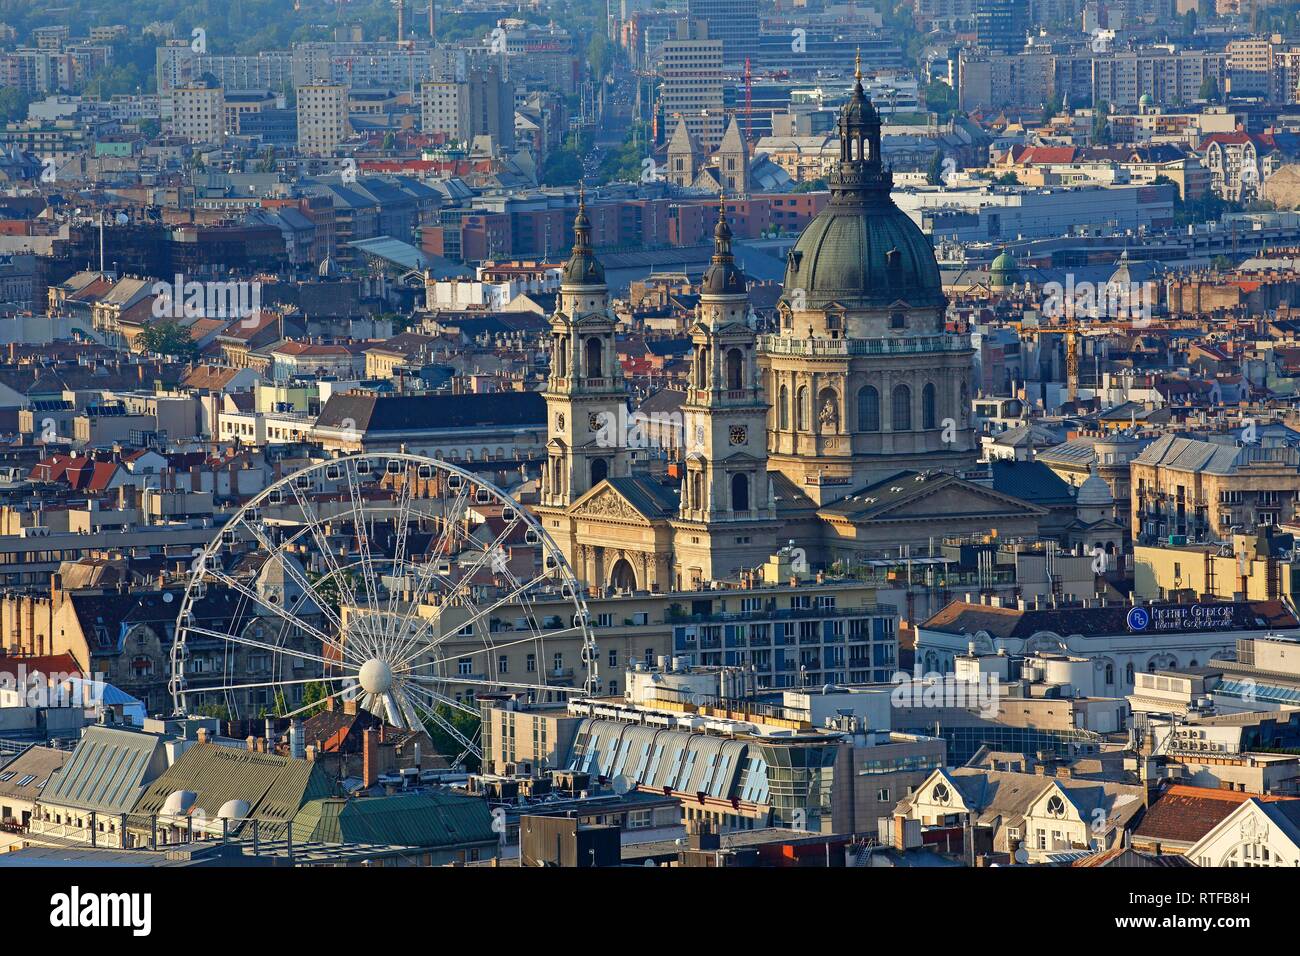 City view with St.-Stephans Basilica, Pest district, Budapest, Hungary Stock Photo